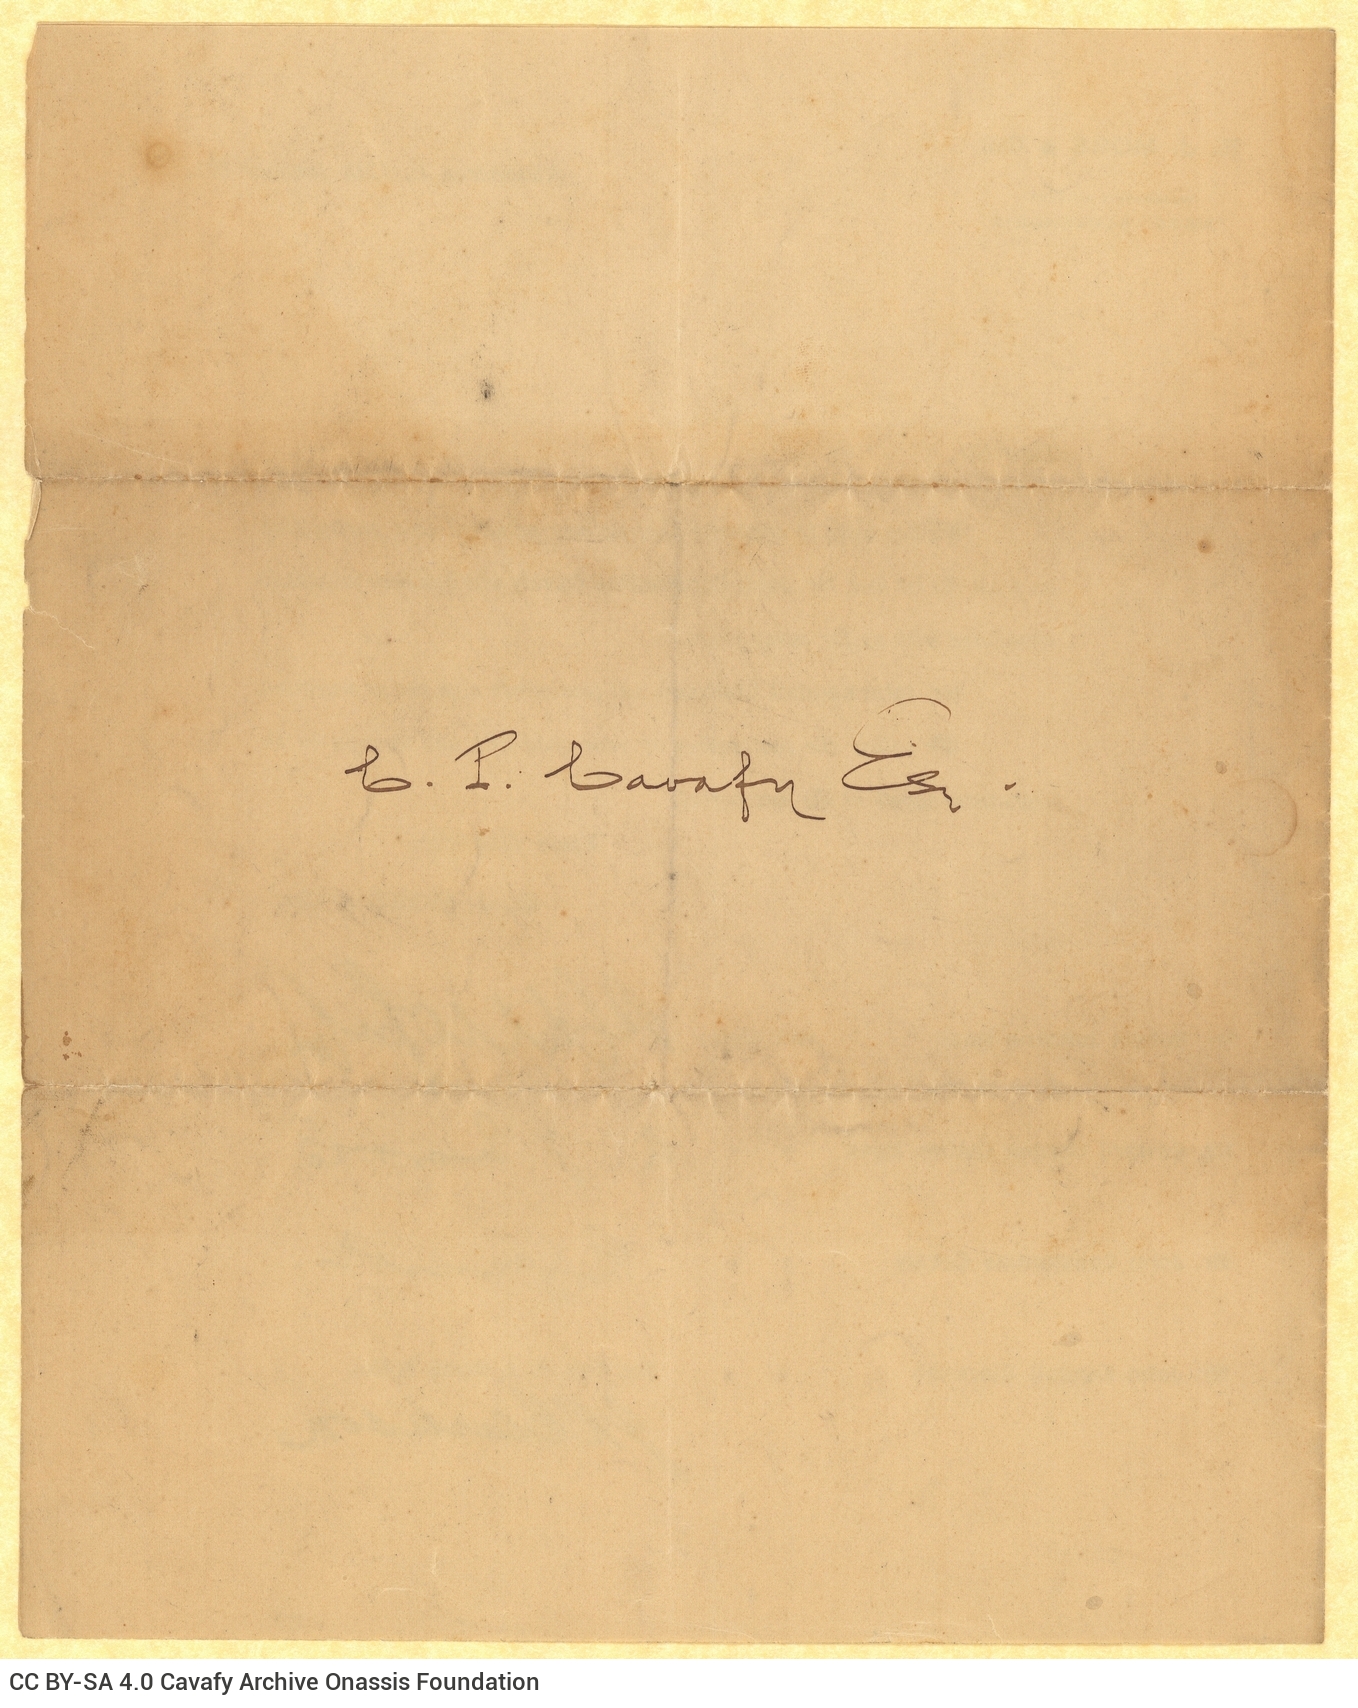 Printed letter by R. J. Moss & Co. on the first page of a double sheet notepaper. The second and third pages are blank. It is